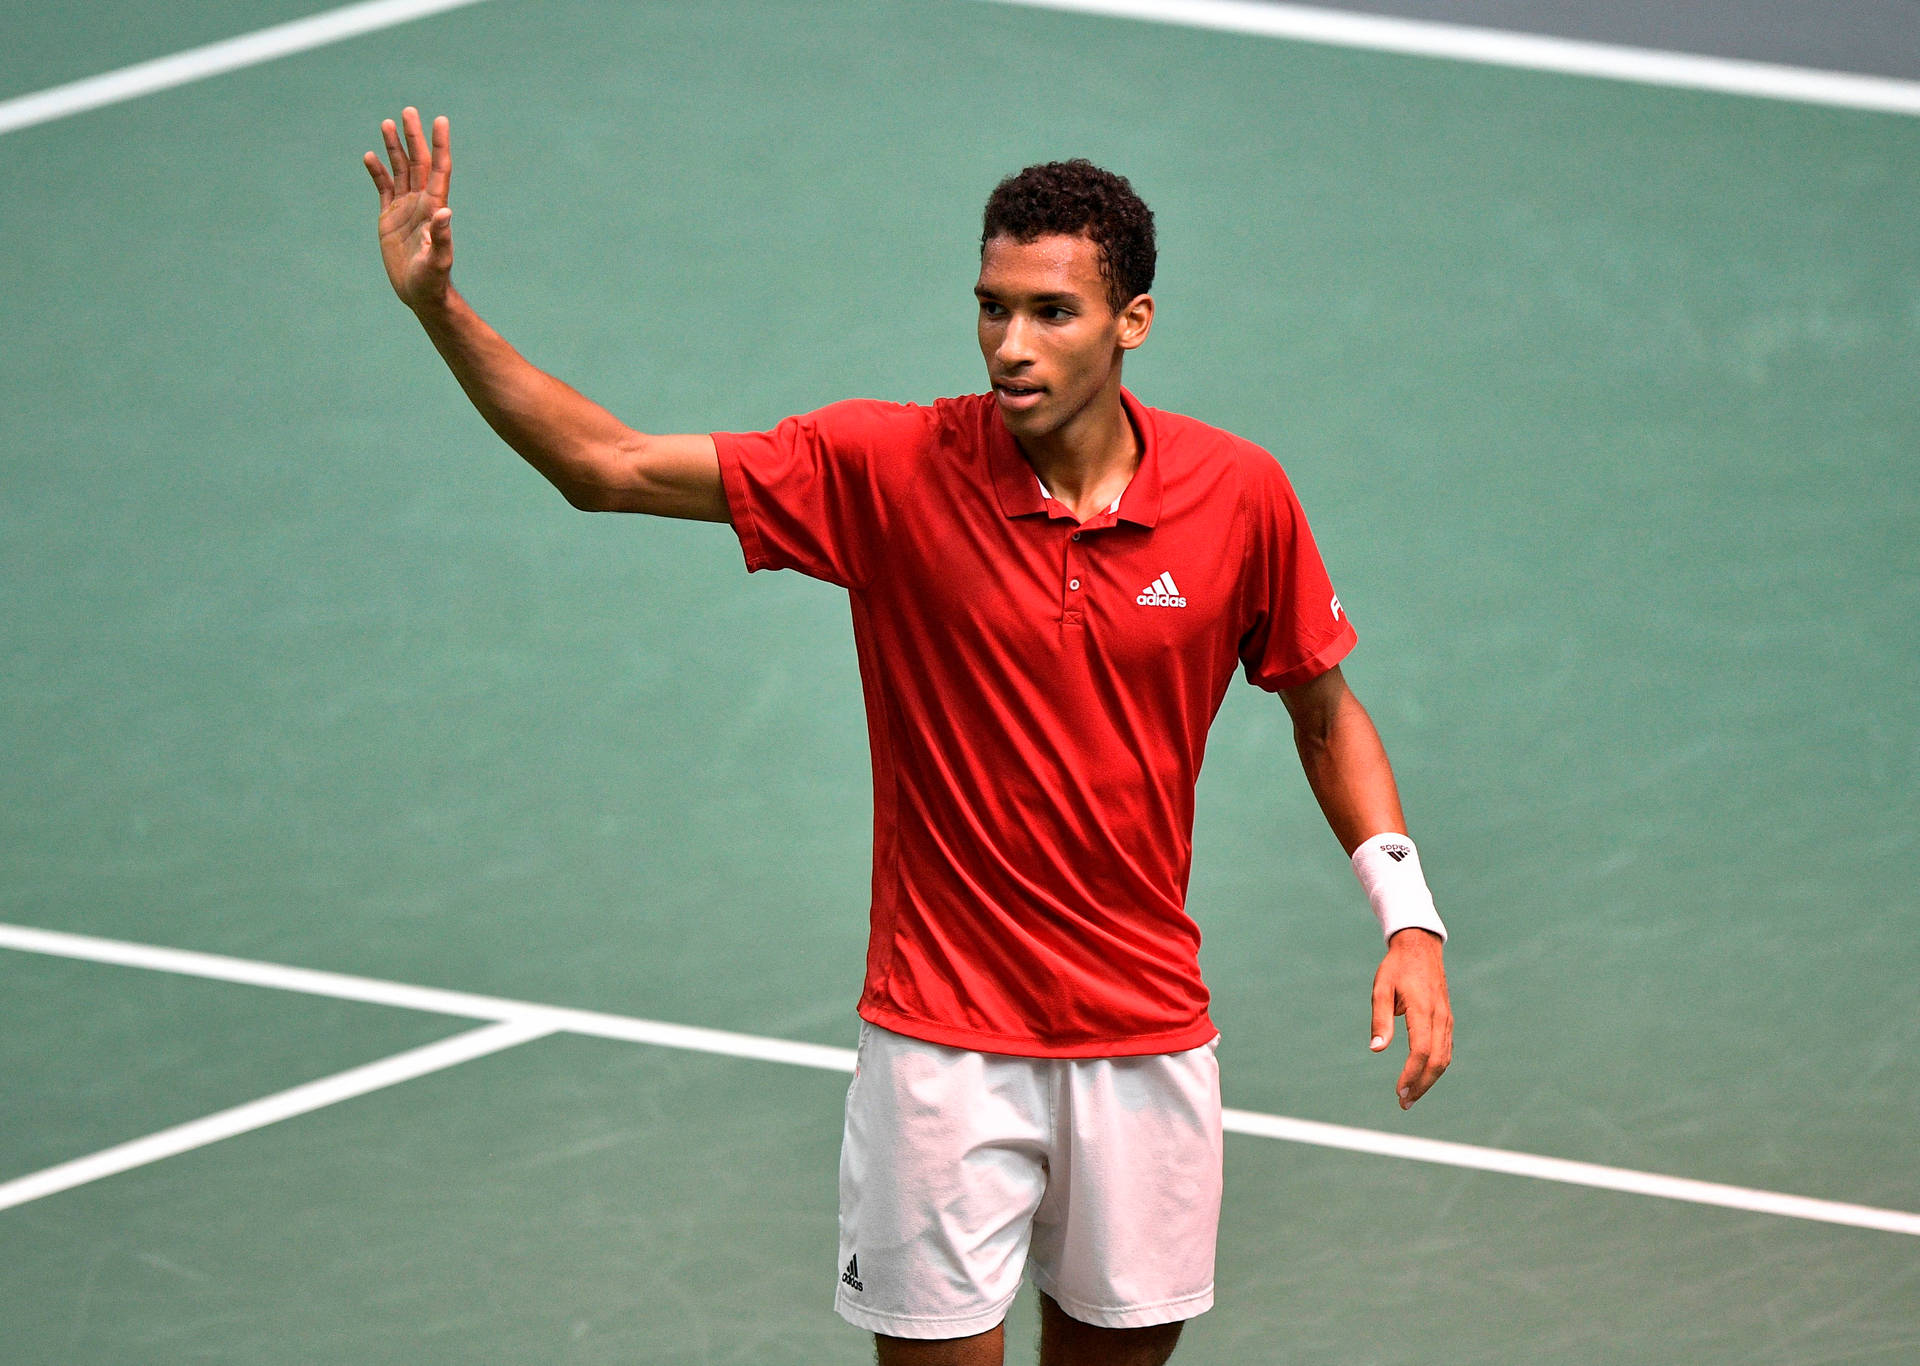 Felix Auger Aliassime Waving To Audience Background